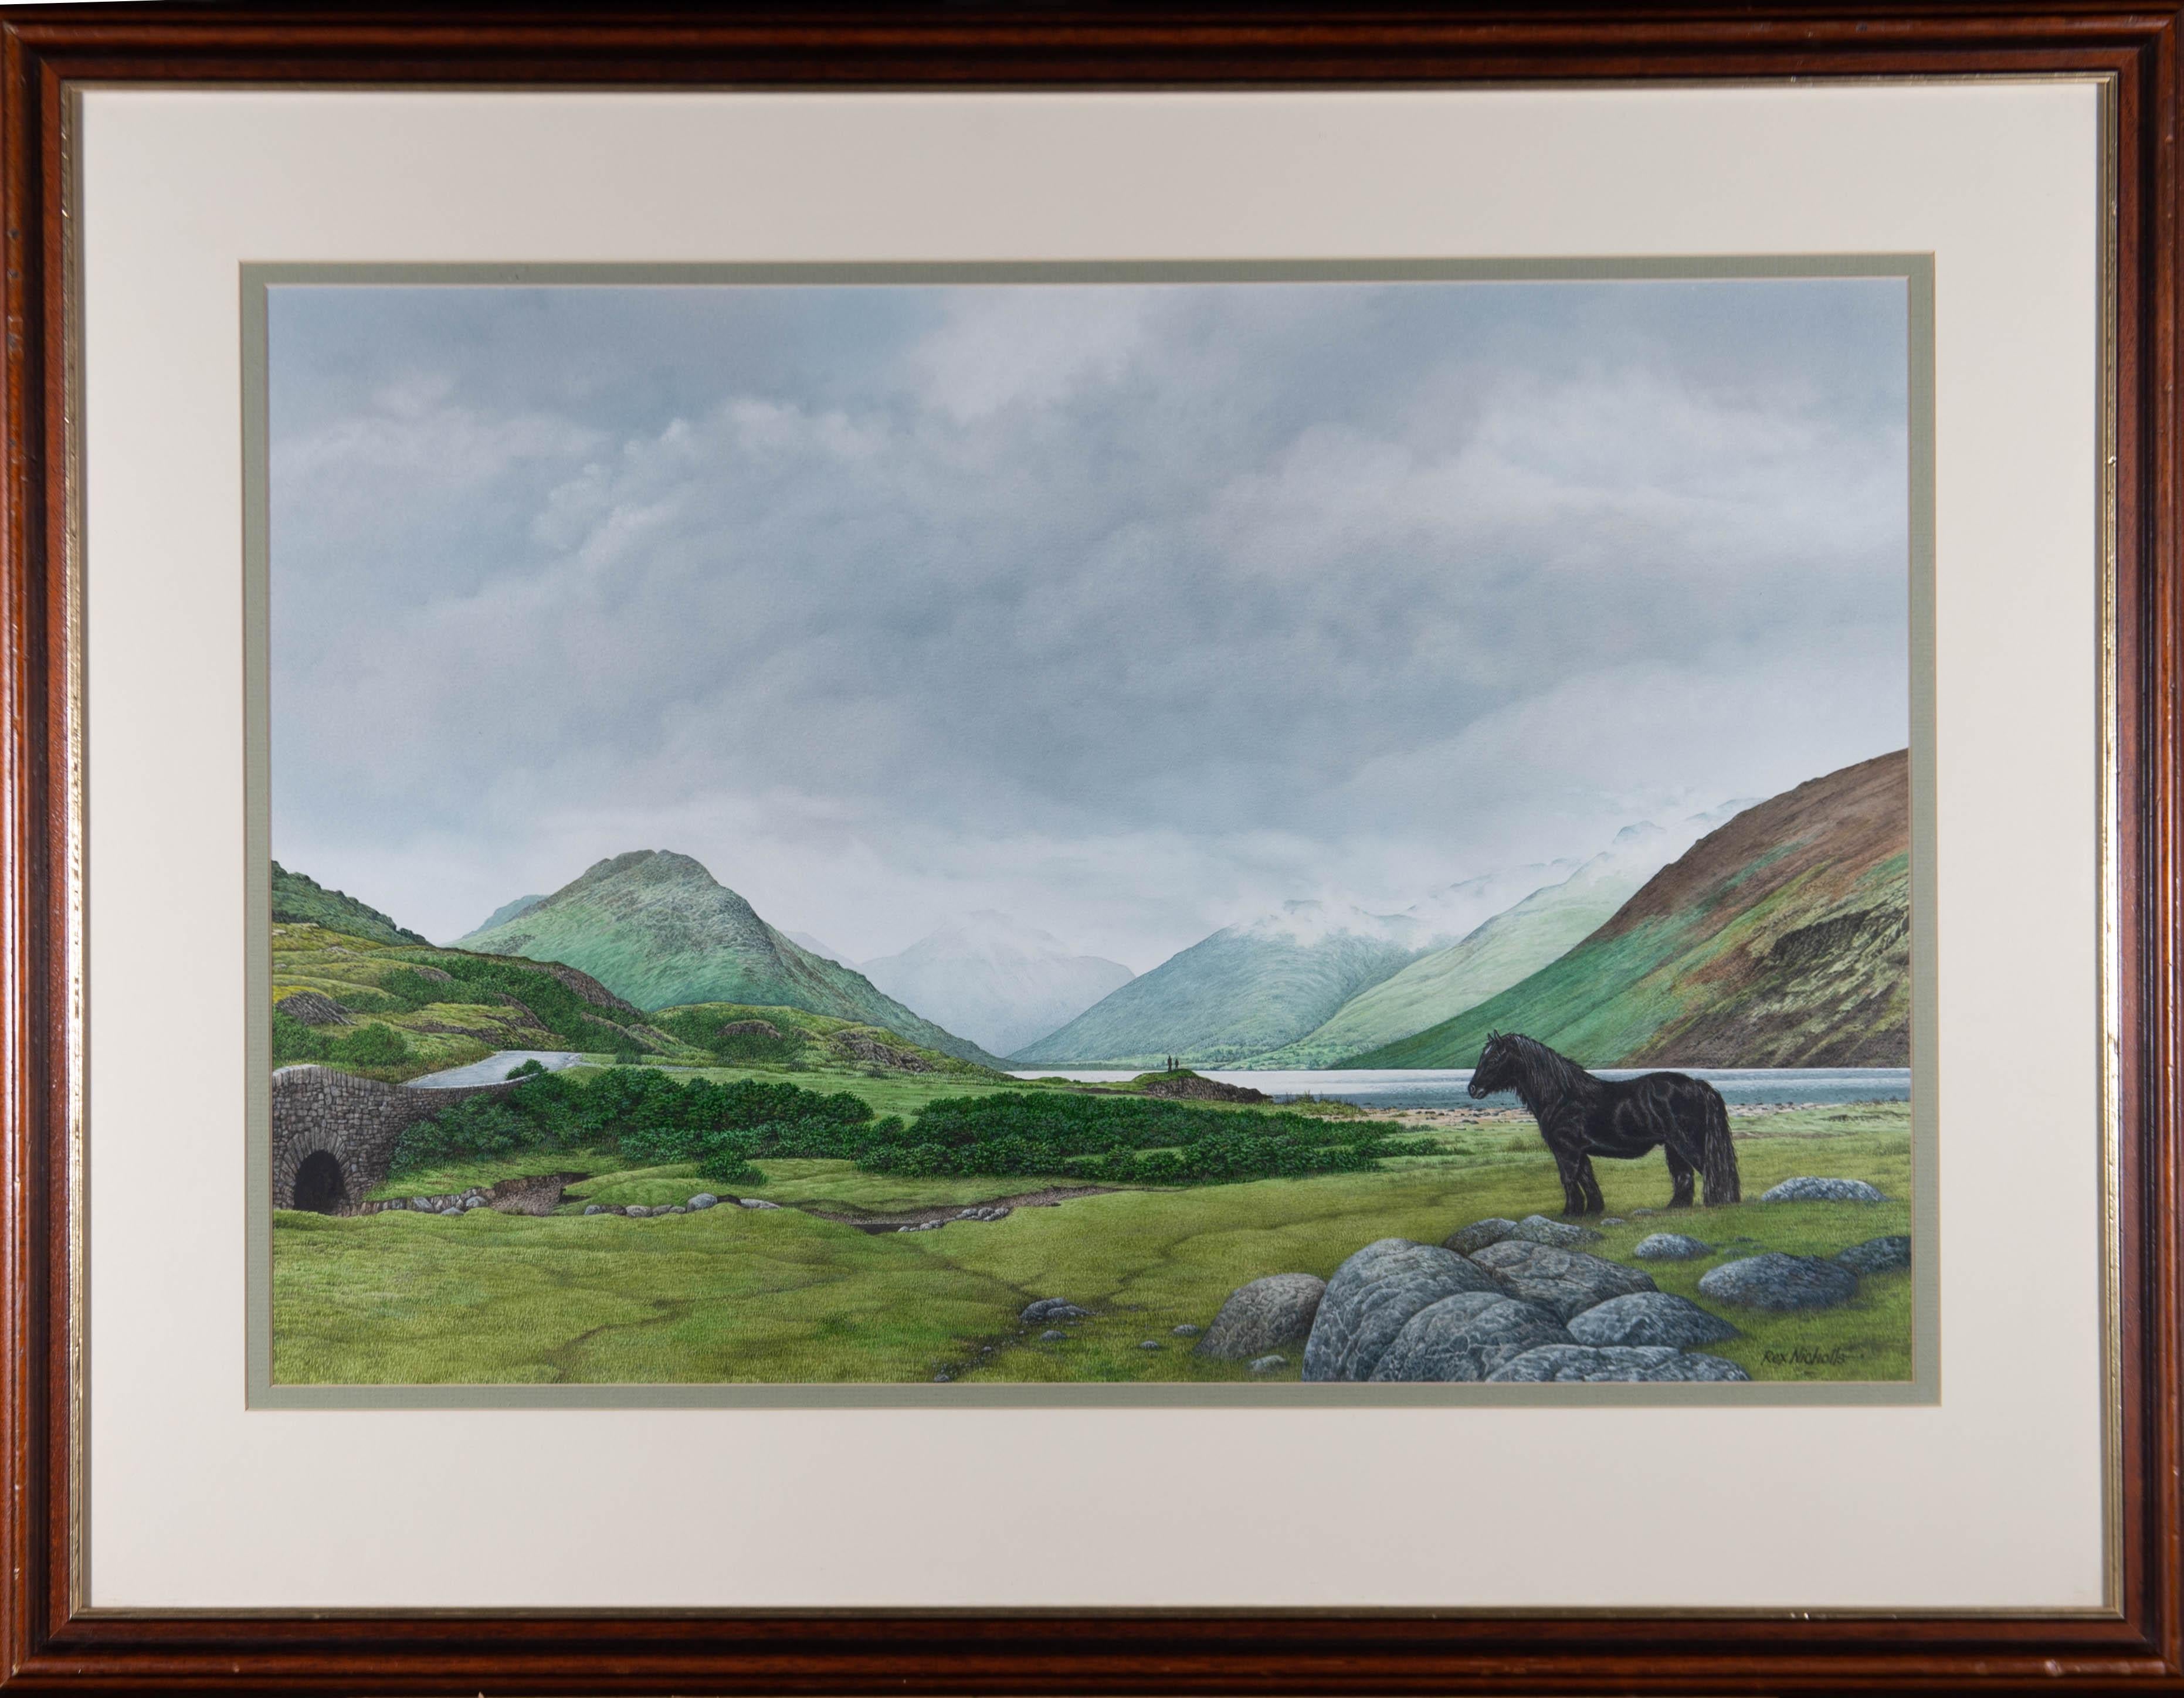 A landscape depicting a wild Fell Pony stood in a valley. Cloud-topped hills and a lake can be seen in the background. Well-presented glazed in a cream and sage double mount and a wooden frame with a gilt-effect inner edge. Signed to the lower-right